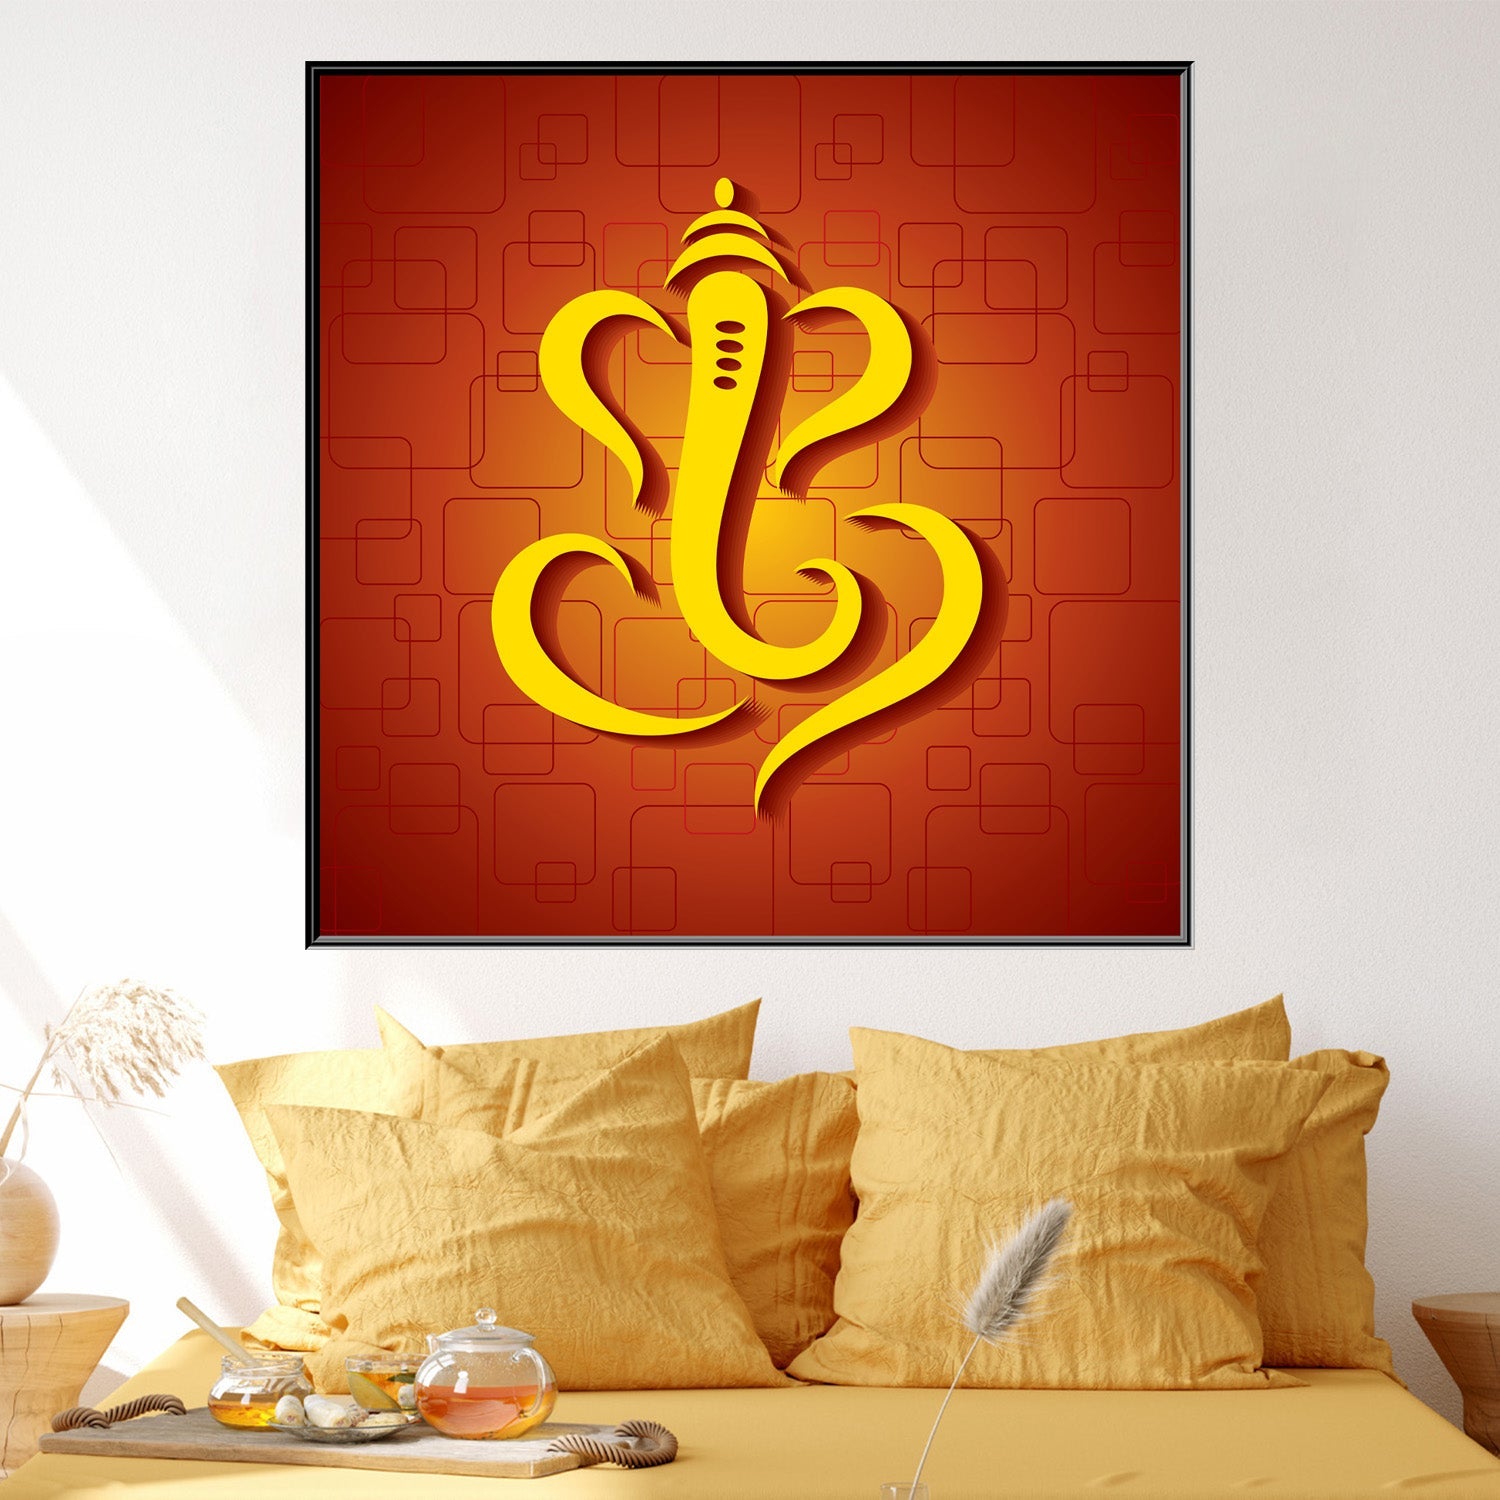 https://cdn.shopify.com/s/files/1/0387/9986/8044/products/AbstractLordGaneshCanvasArtprintStretched-4.jpg